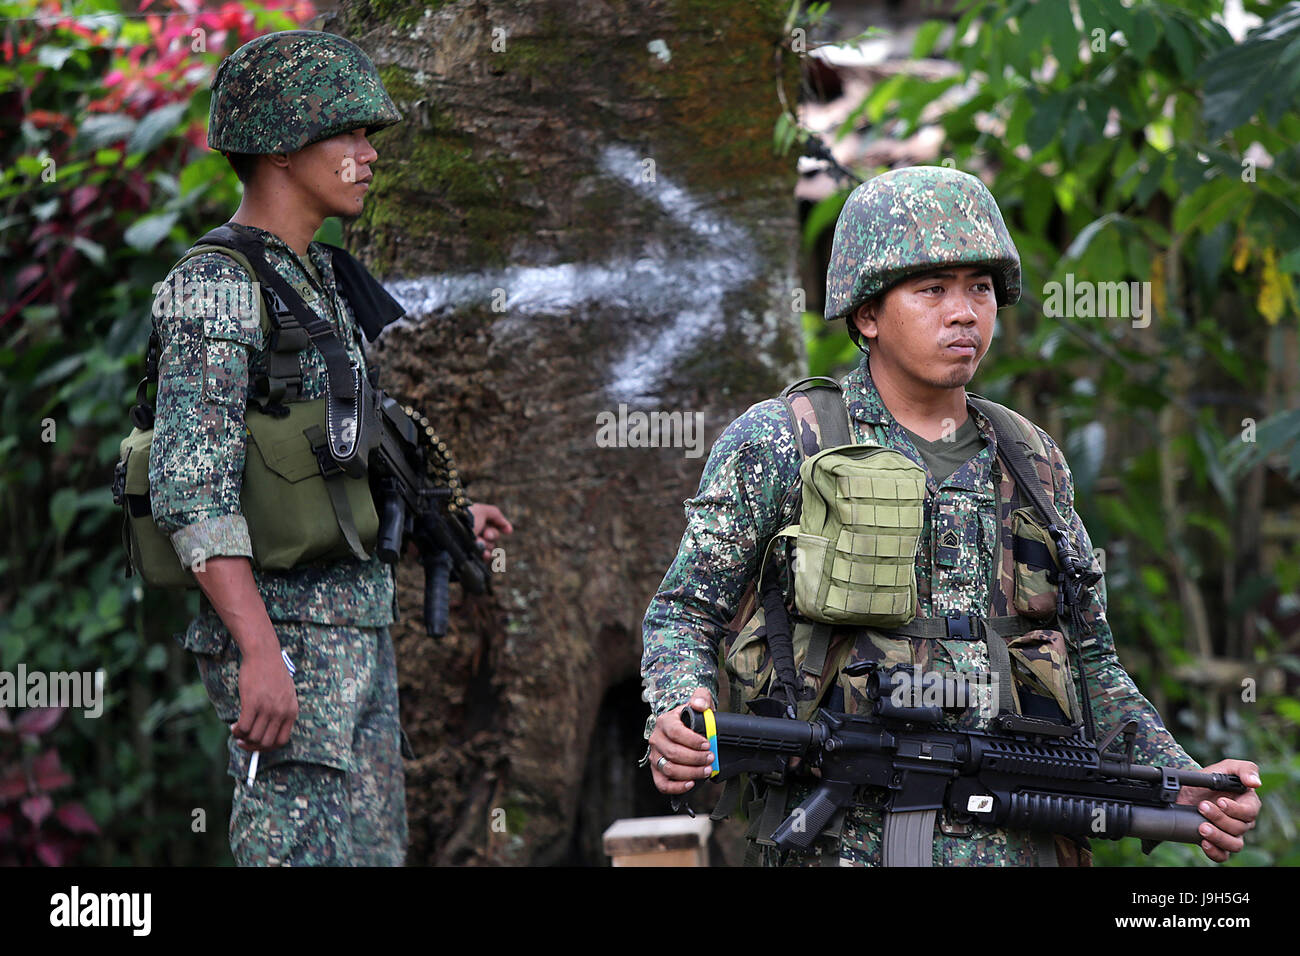 Marawi City, Philippines. 2nd June, 2017. Government soldiers secure an area in Lanao Del Sur Province, the Philippines, June 2, 2017. More elite troops were sent to the besieged Marawi City in the southern Philippines to flush the remaining members of the Maute militant group who are holed up in some parts of the city. Credit: Rouelle Umali/Xinhua/Alamy Live News Stock Photo